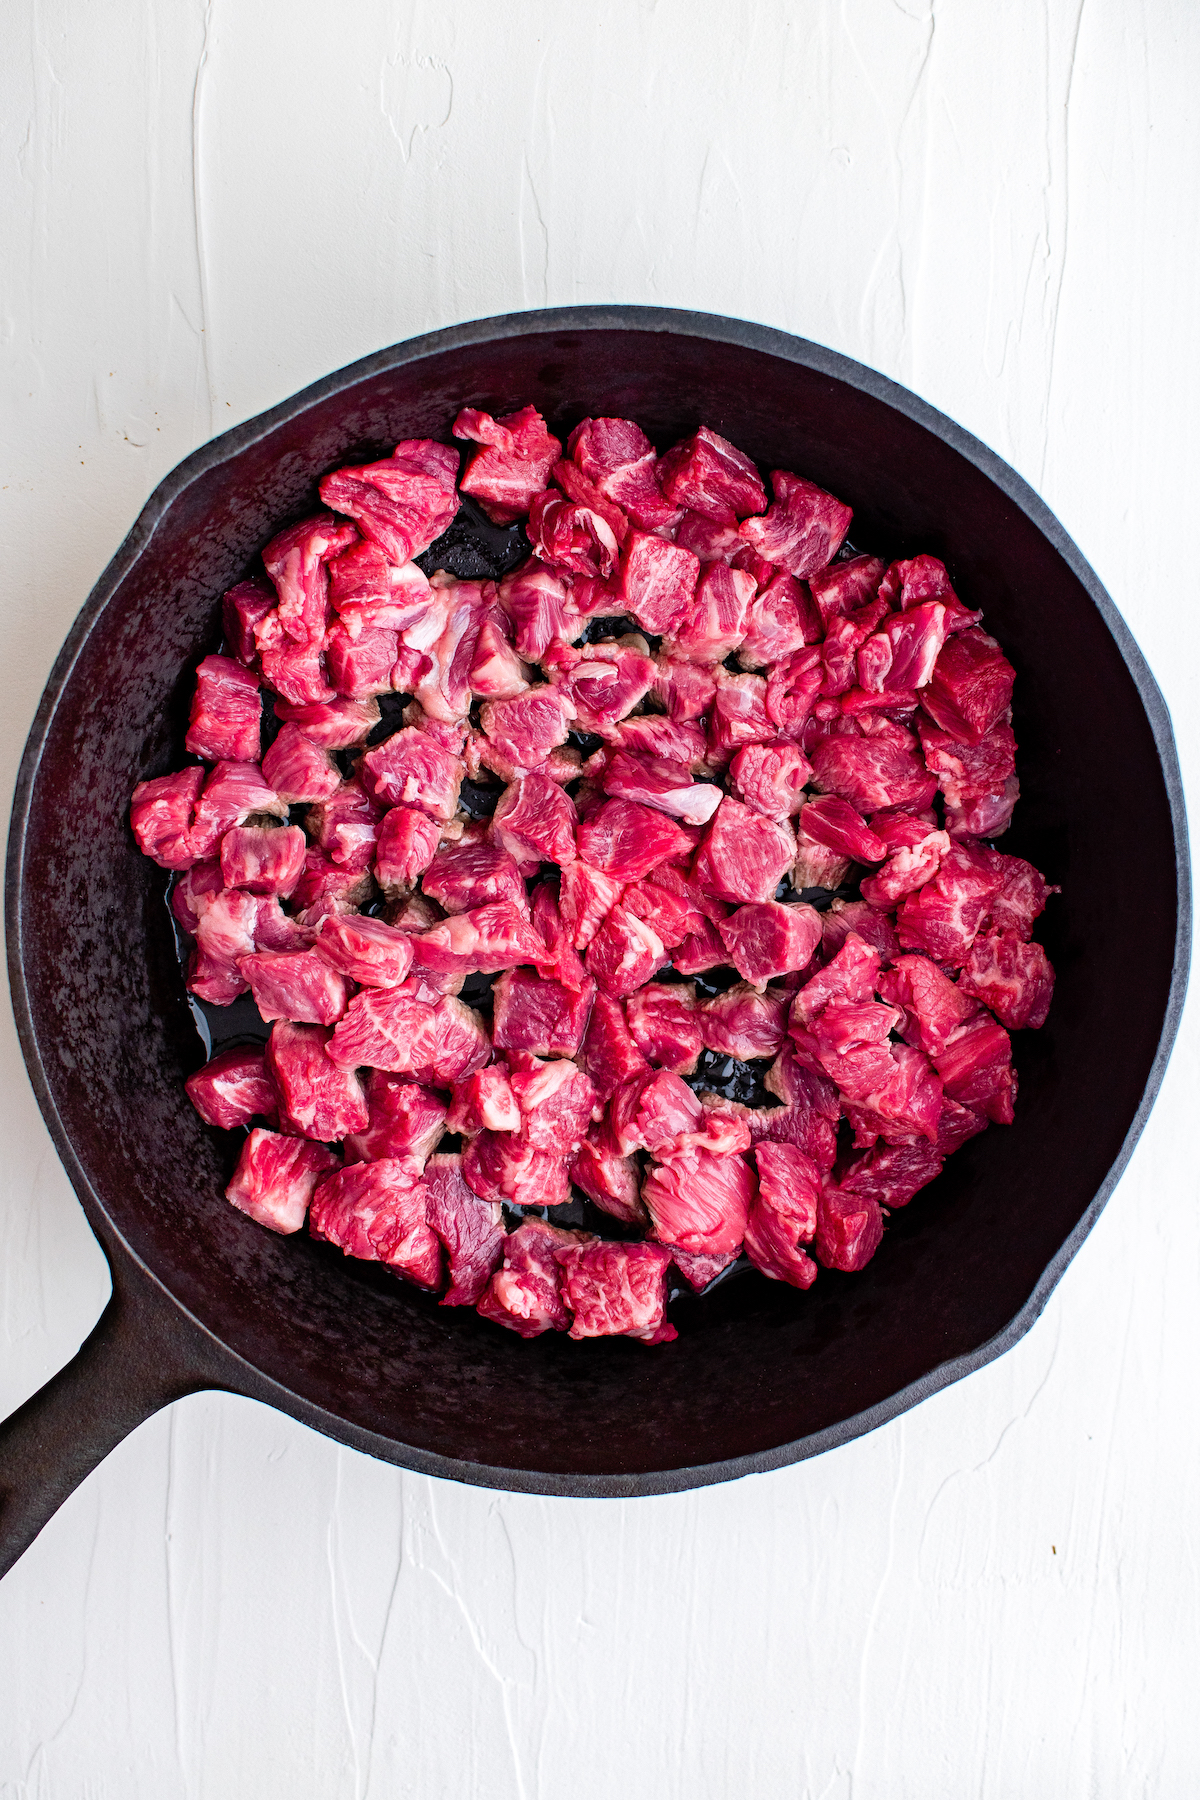 small pieces of beef in a cast iron skillet